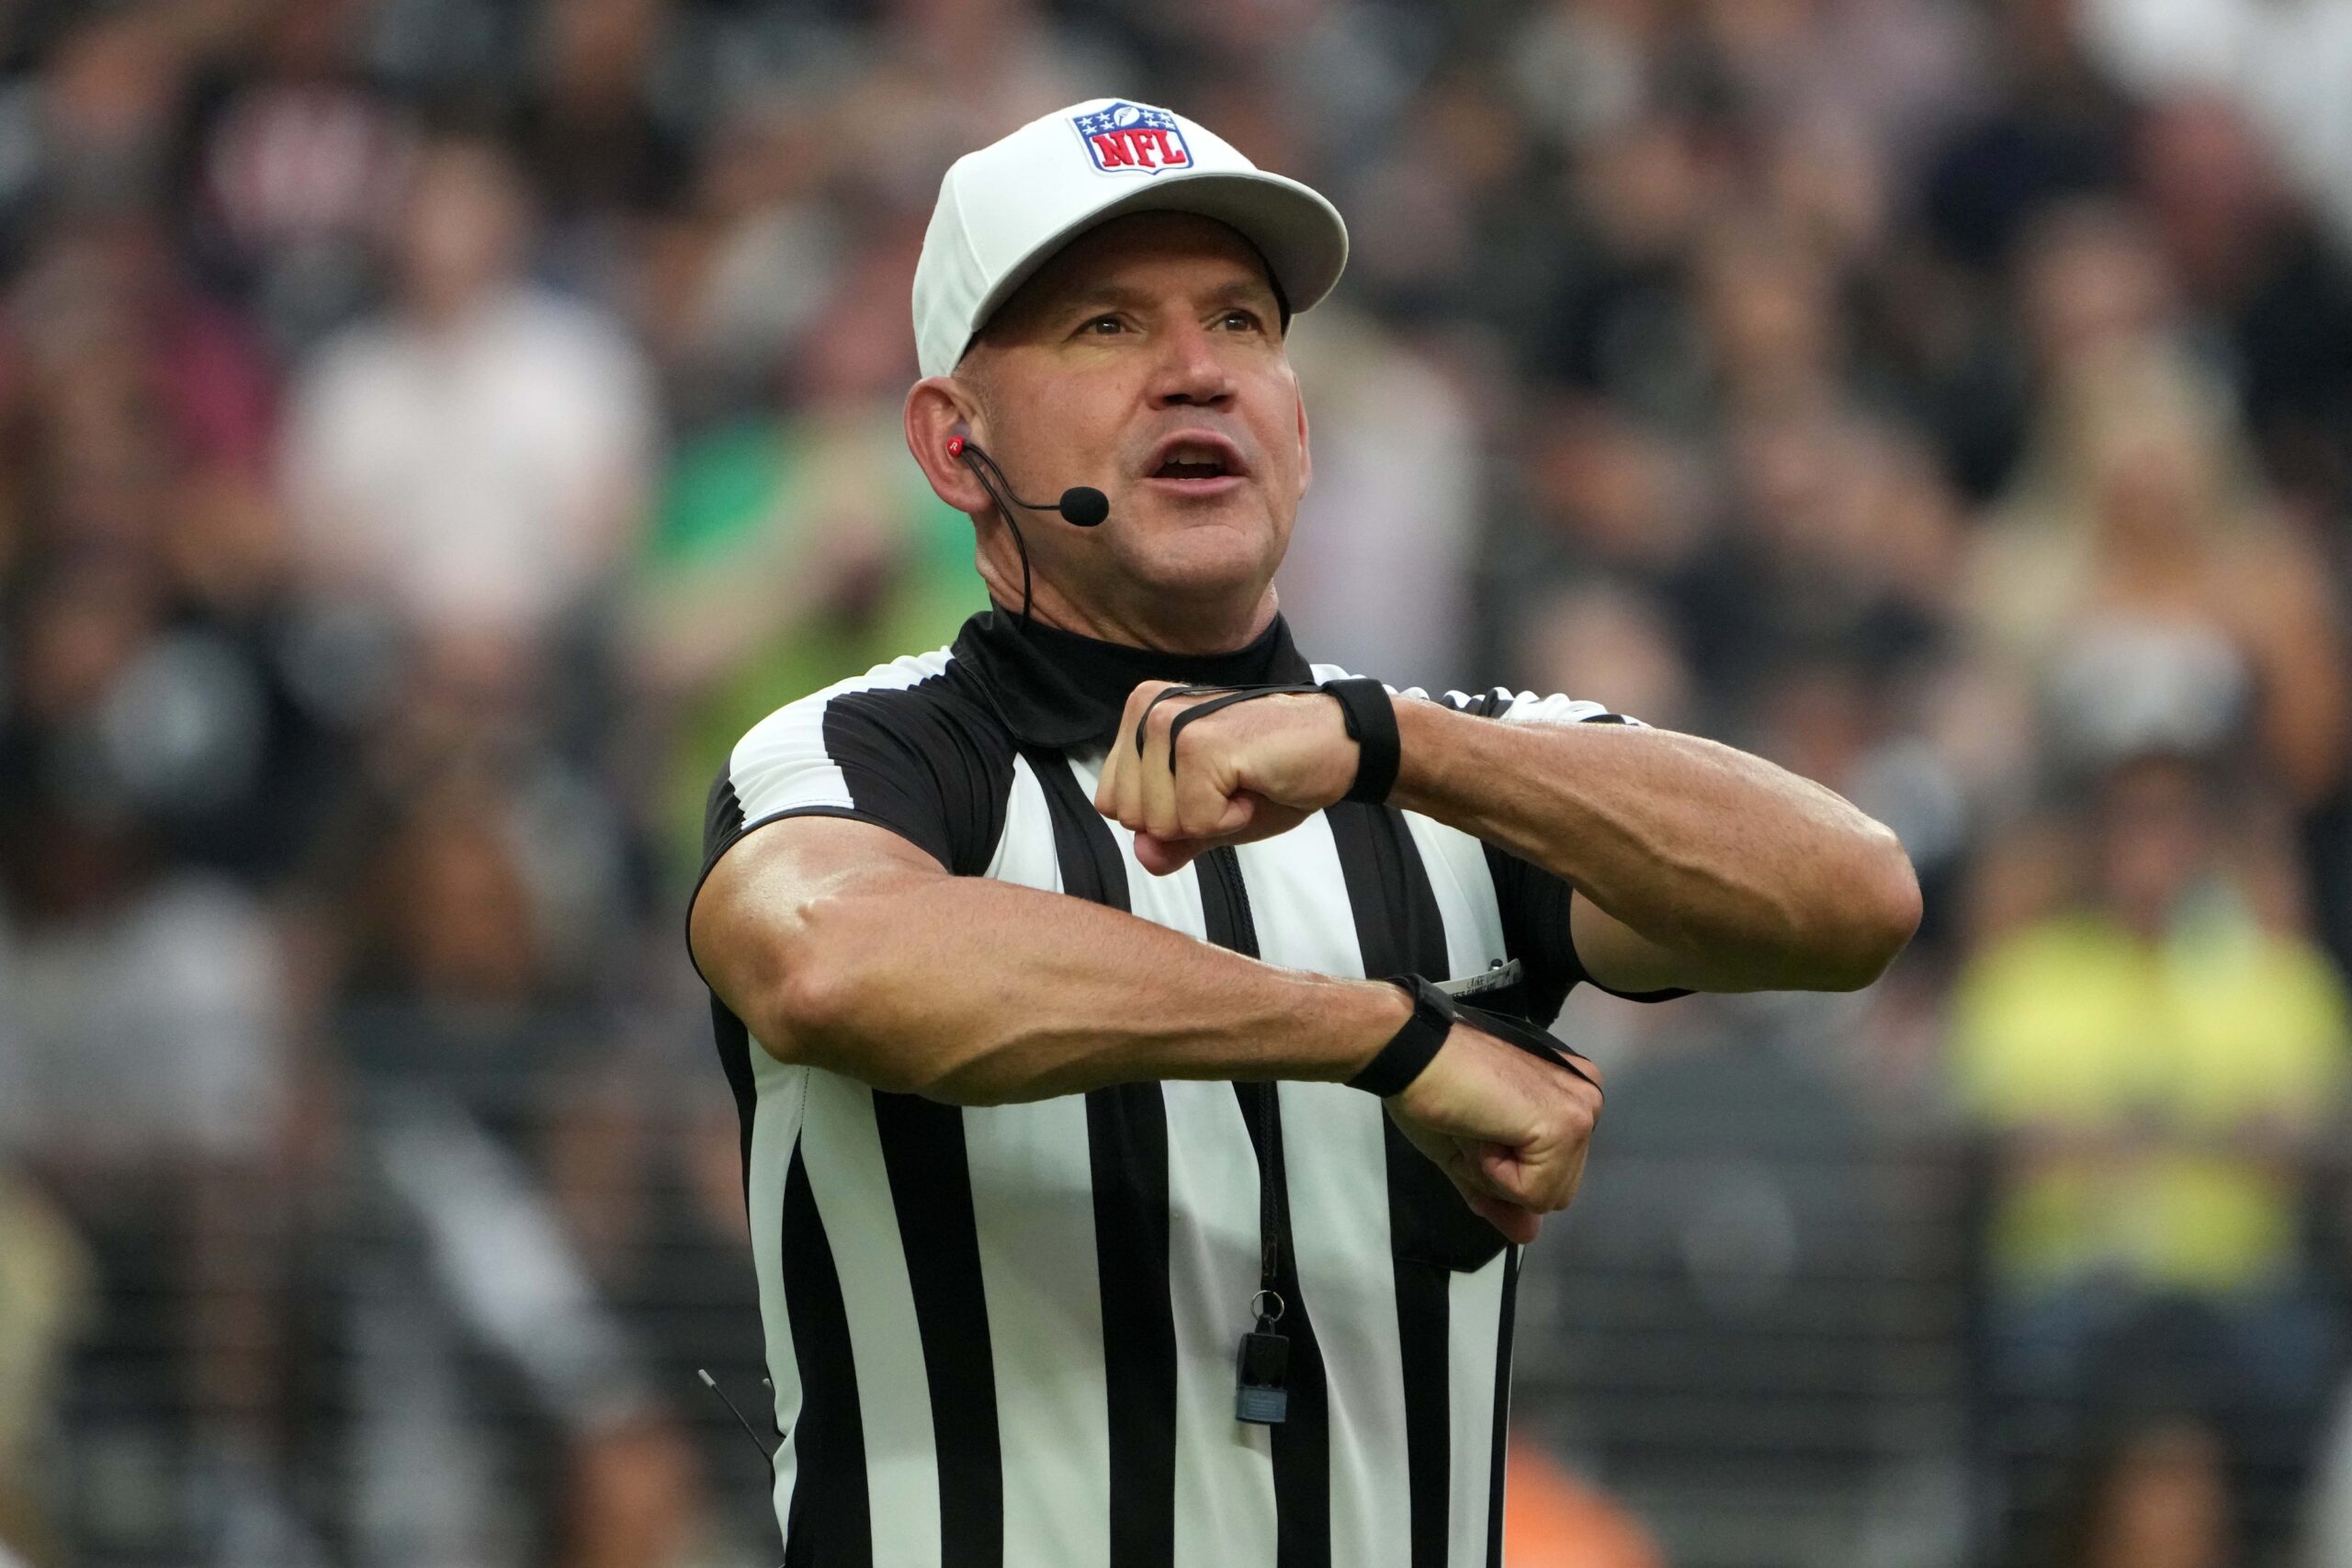 NFL referee assignments Week 4: Refs assigned for each NFL game this week